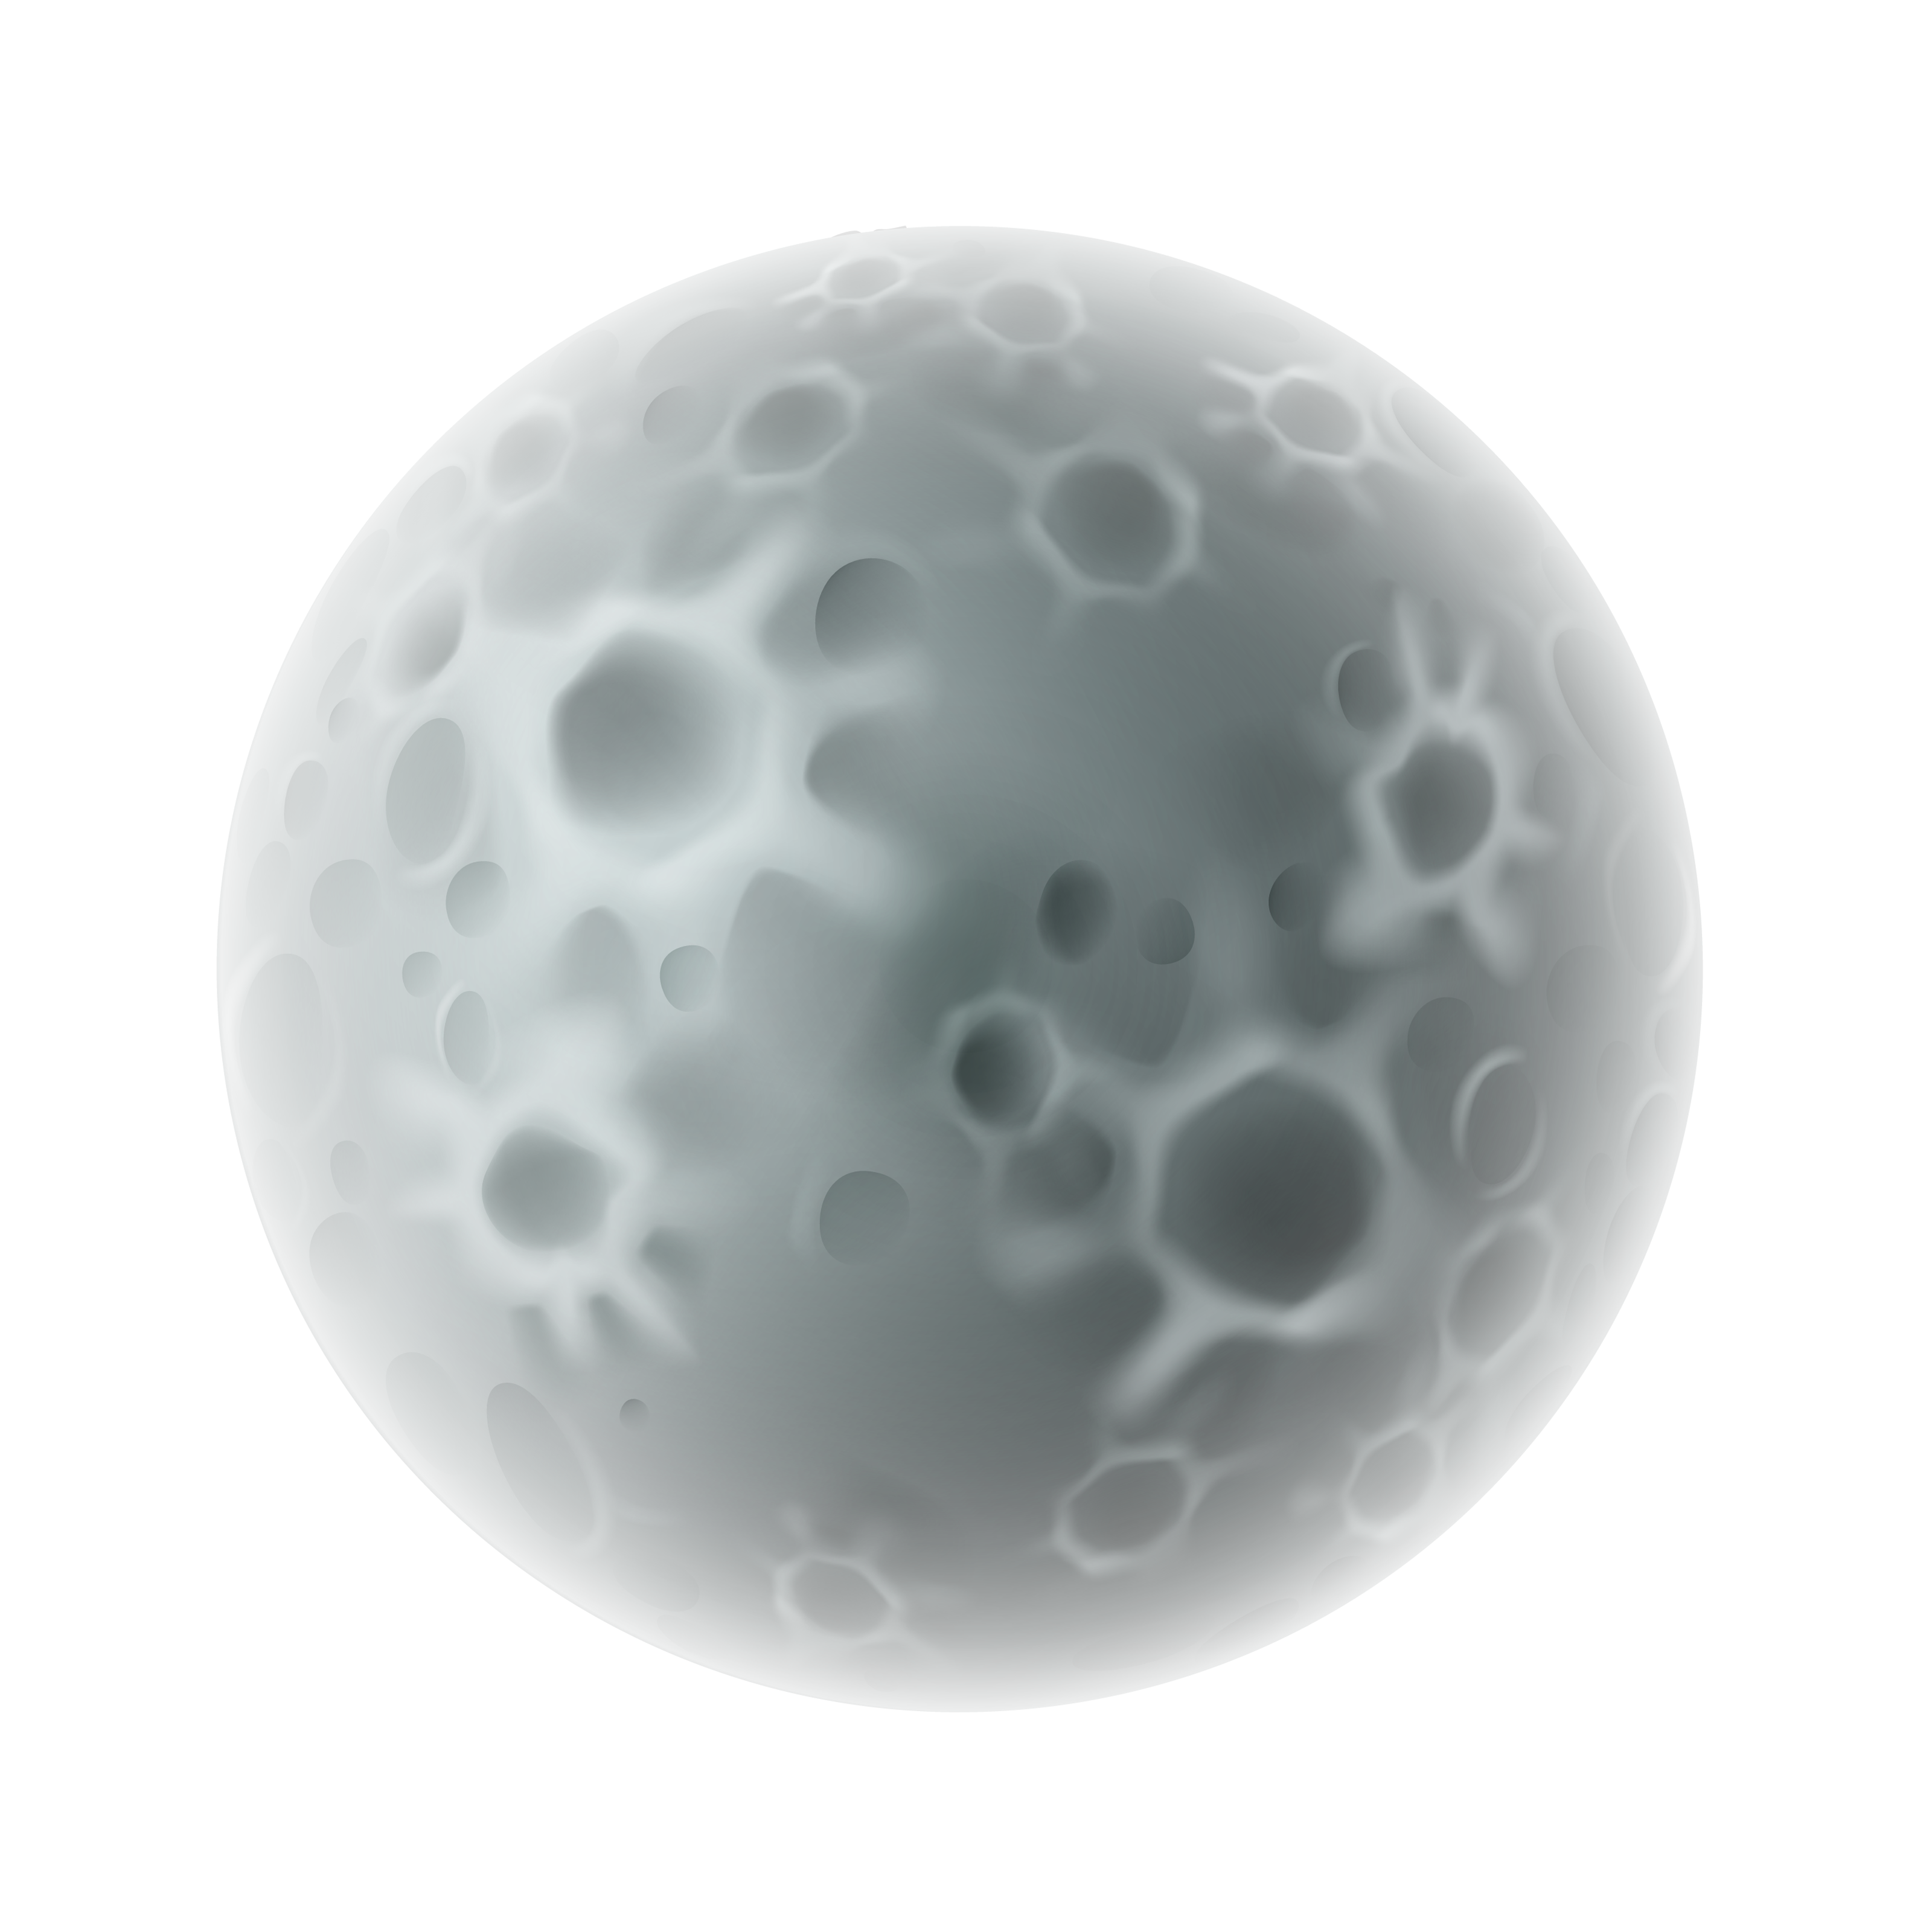 Moon PNG images Download